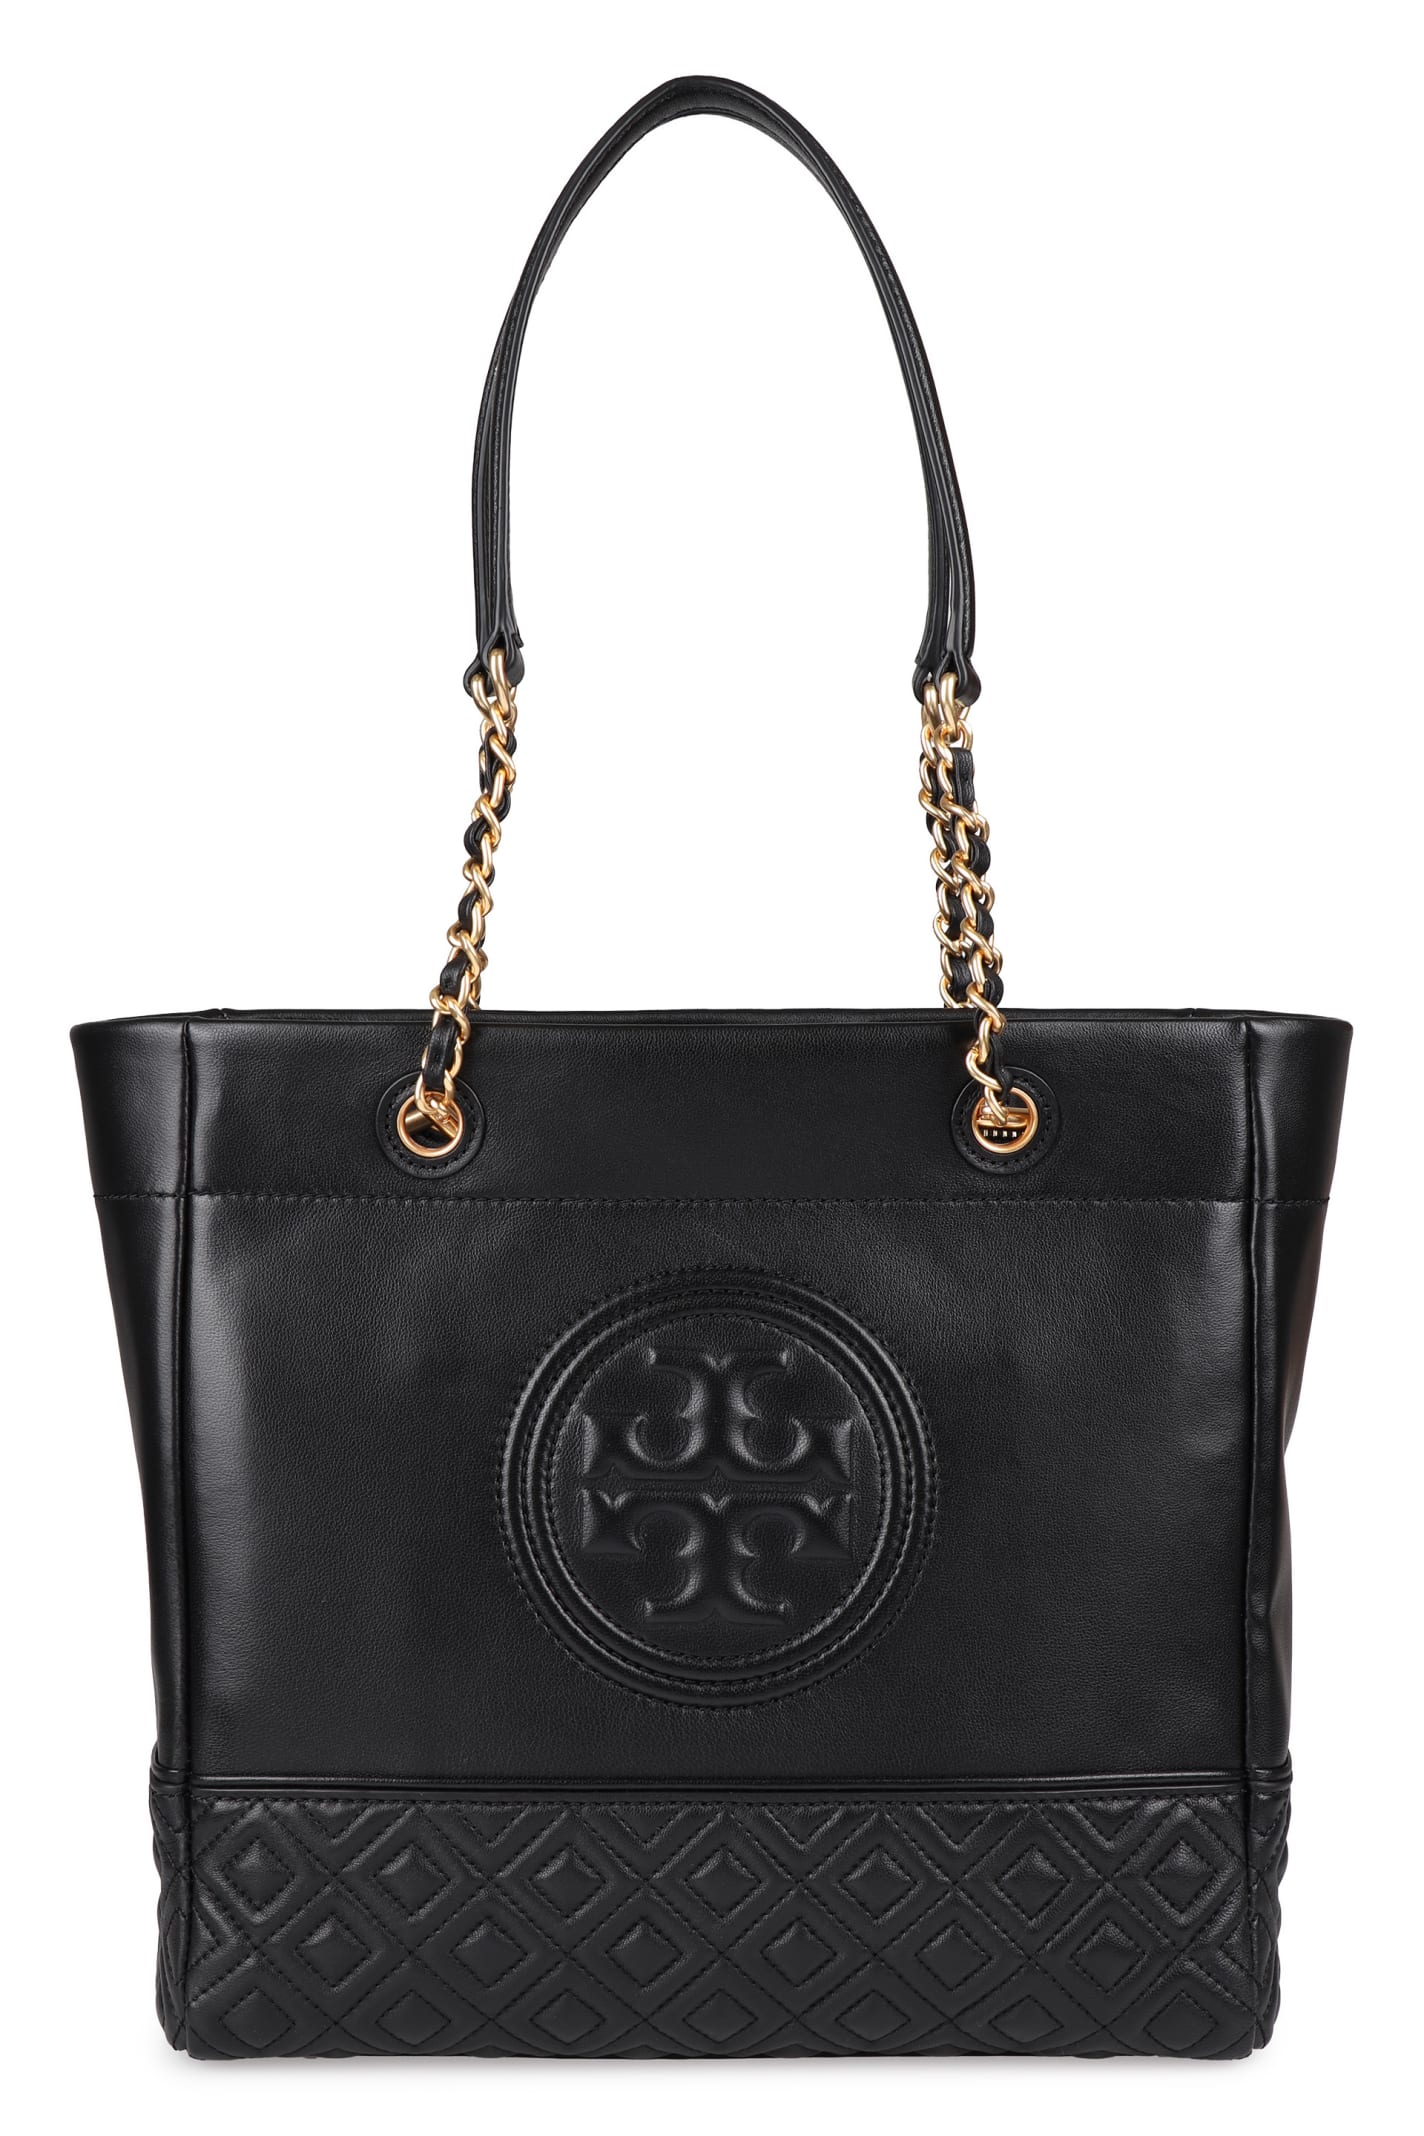 Tory Burch Fleming Leather Tote In Black